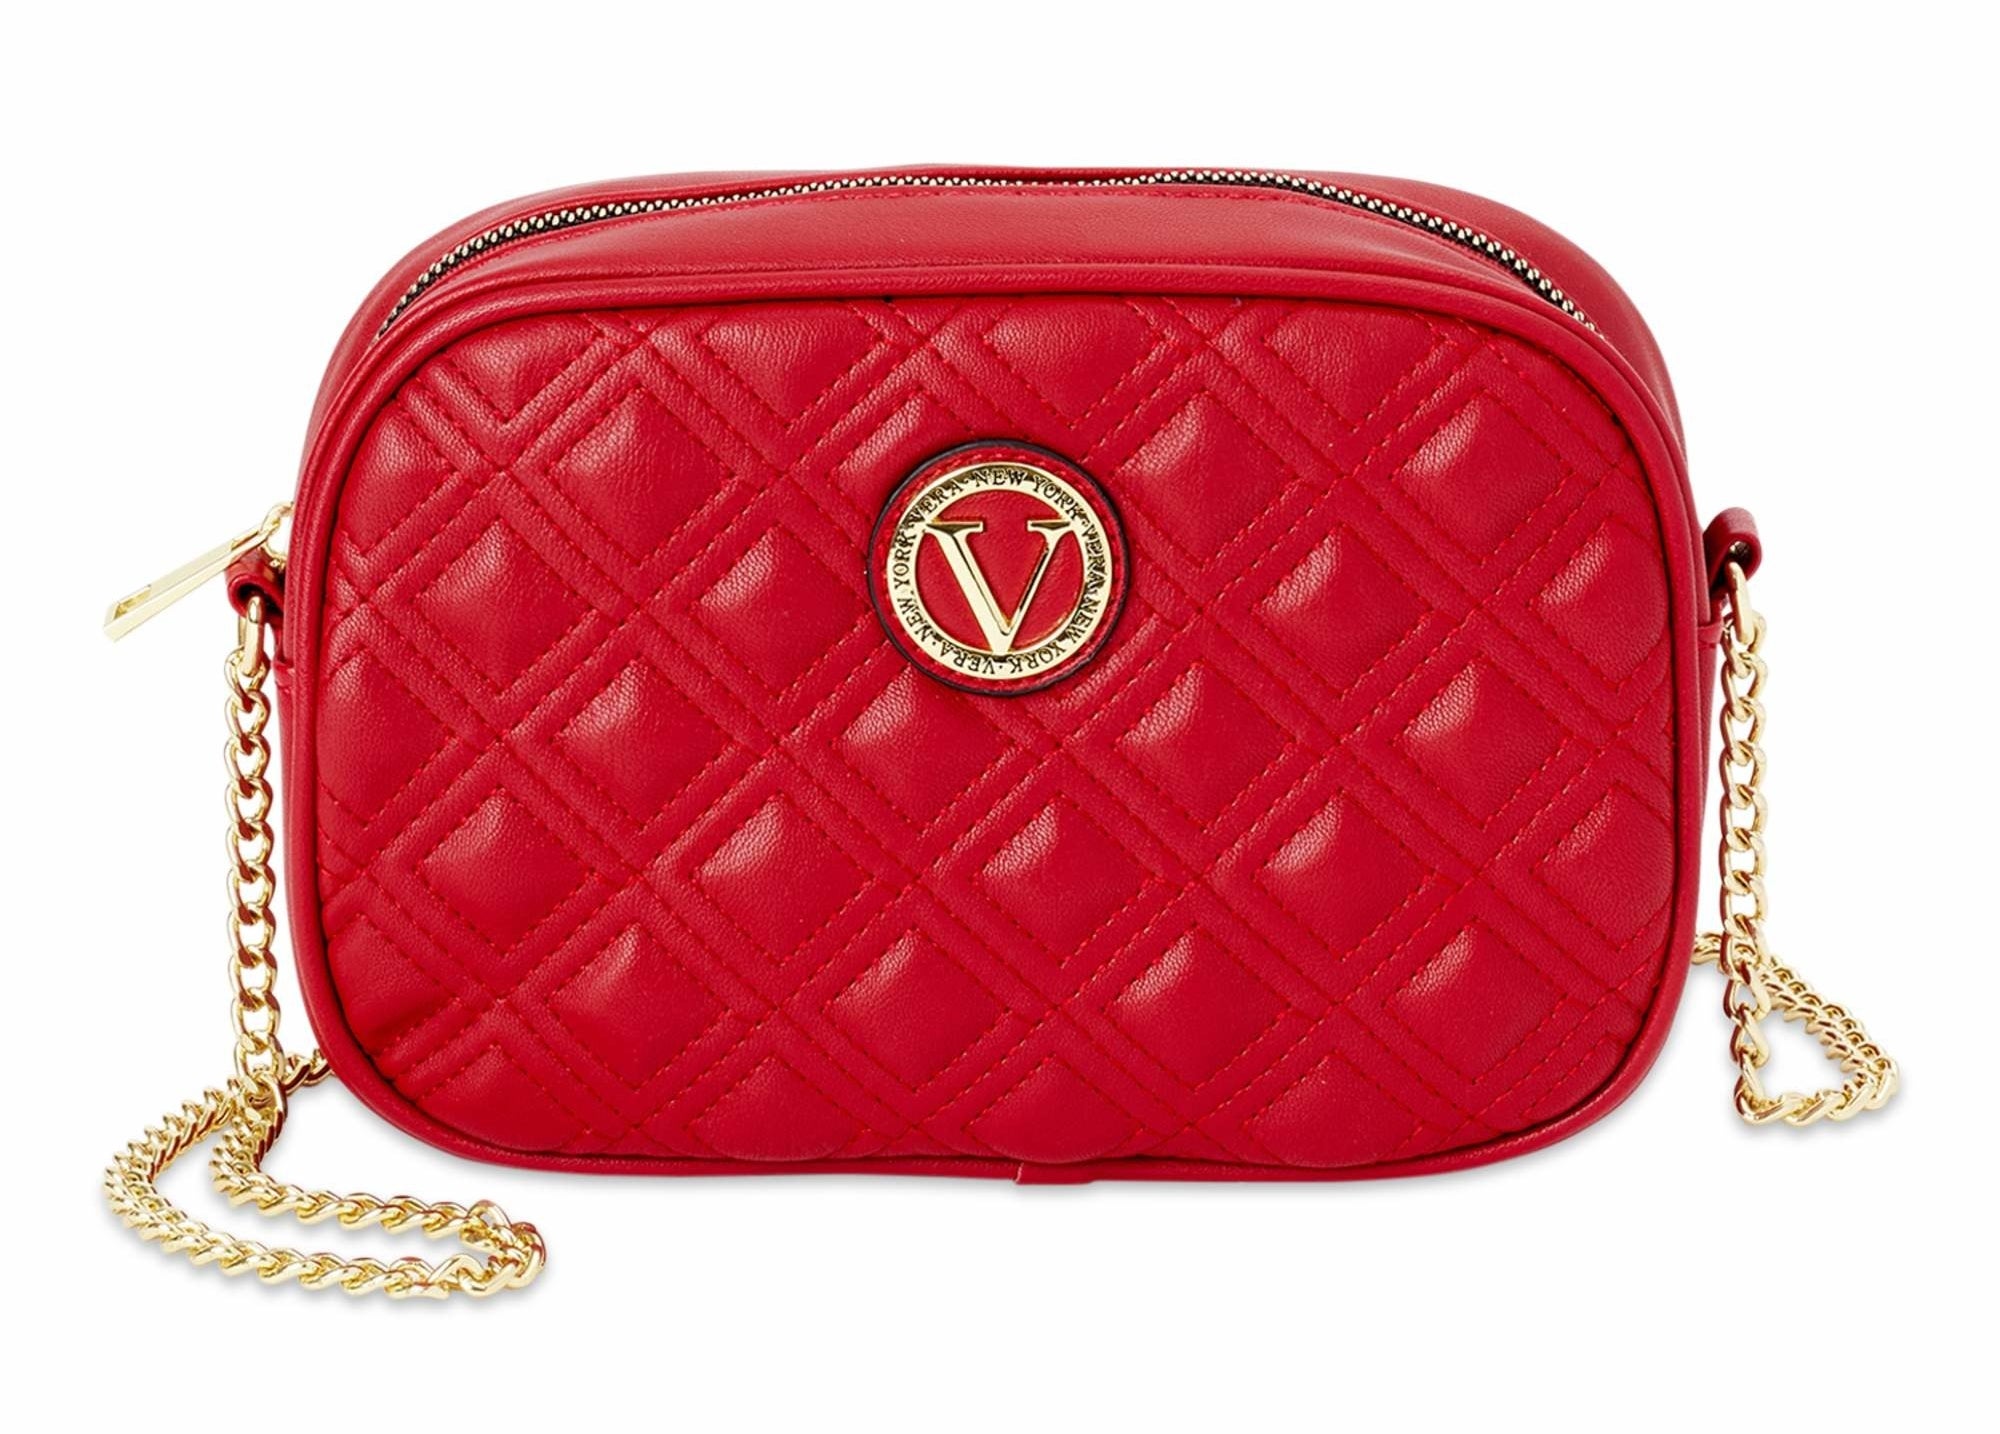 The red quilted bag